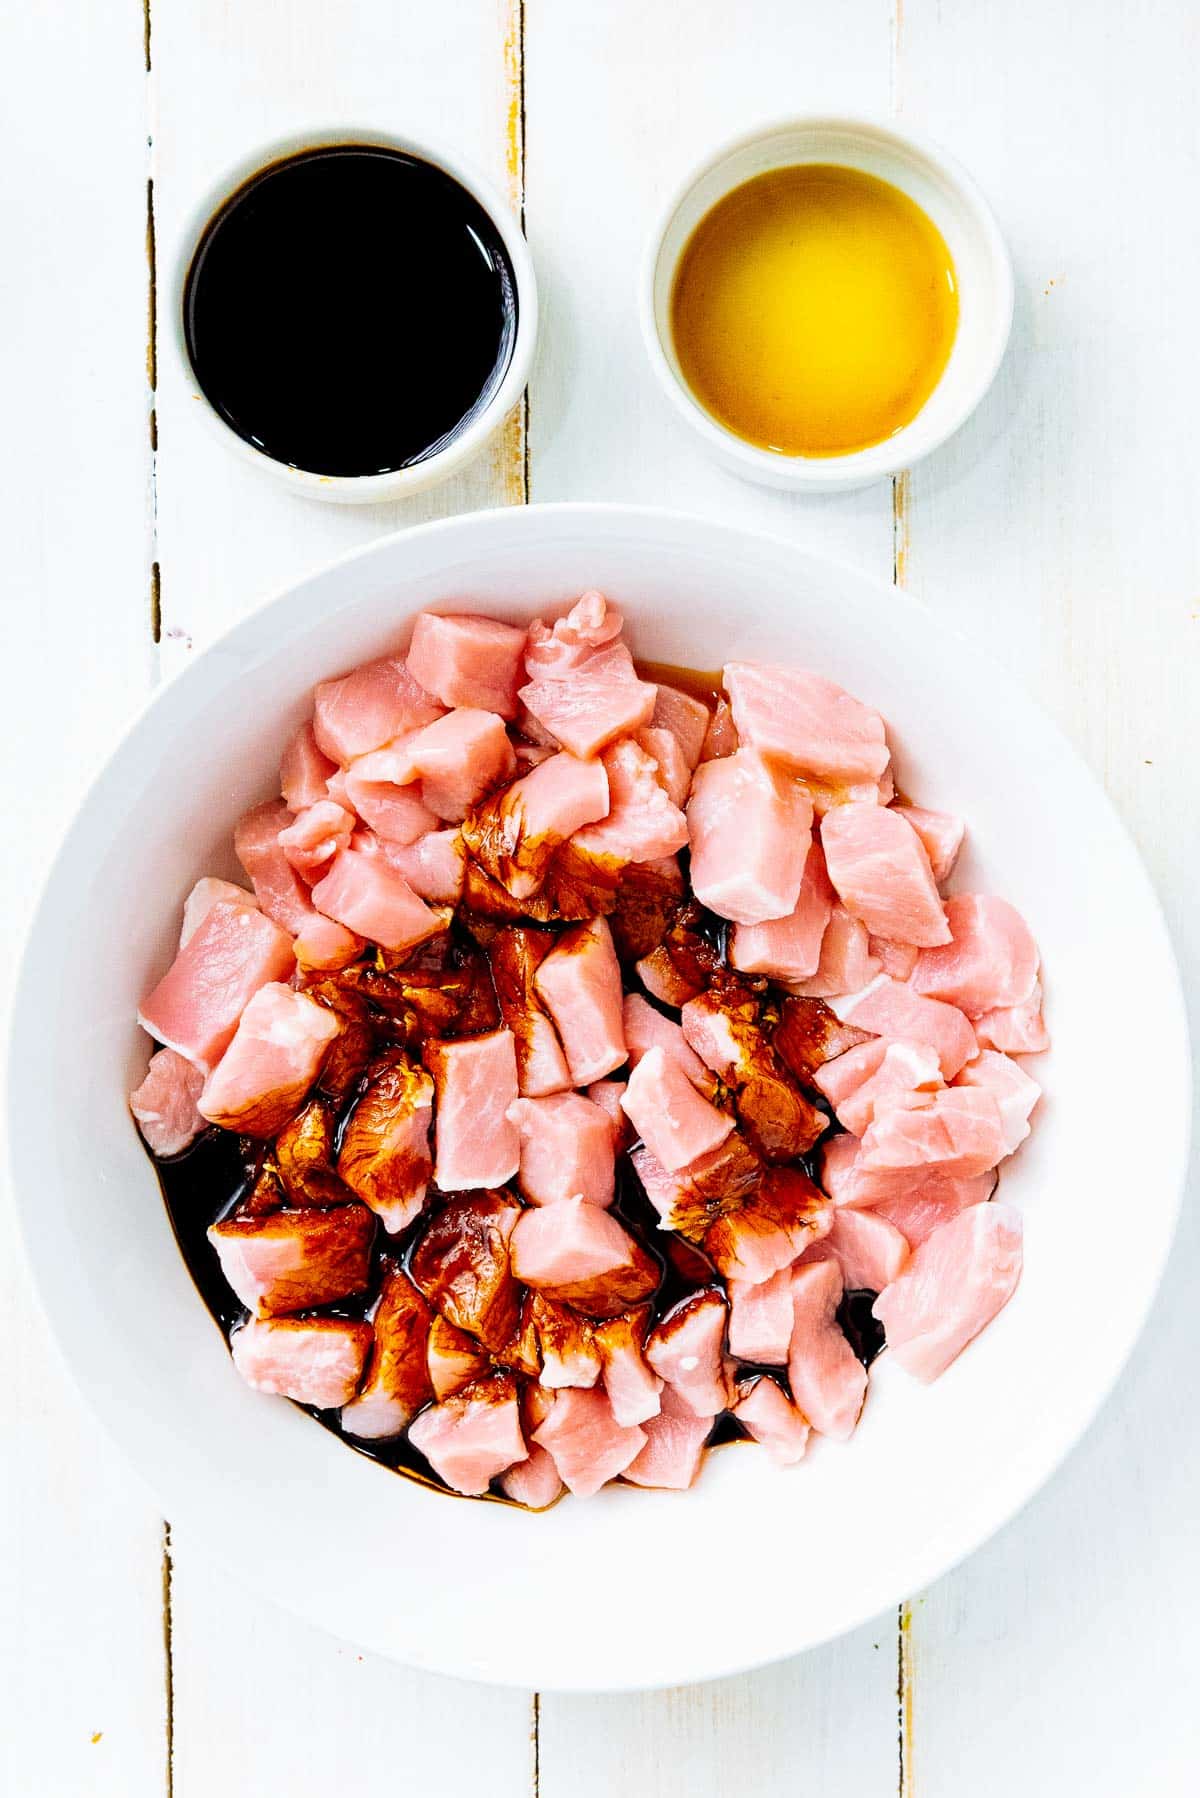 Pork chunks with marinade inside a white bowl with sauces in the background on top of a white board.